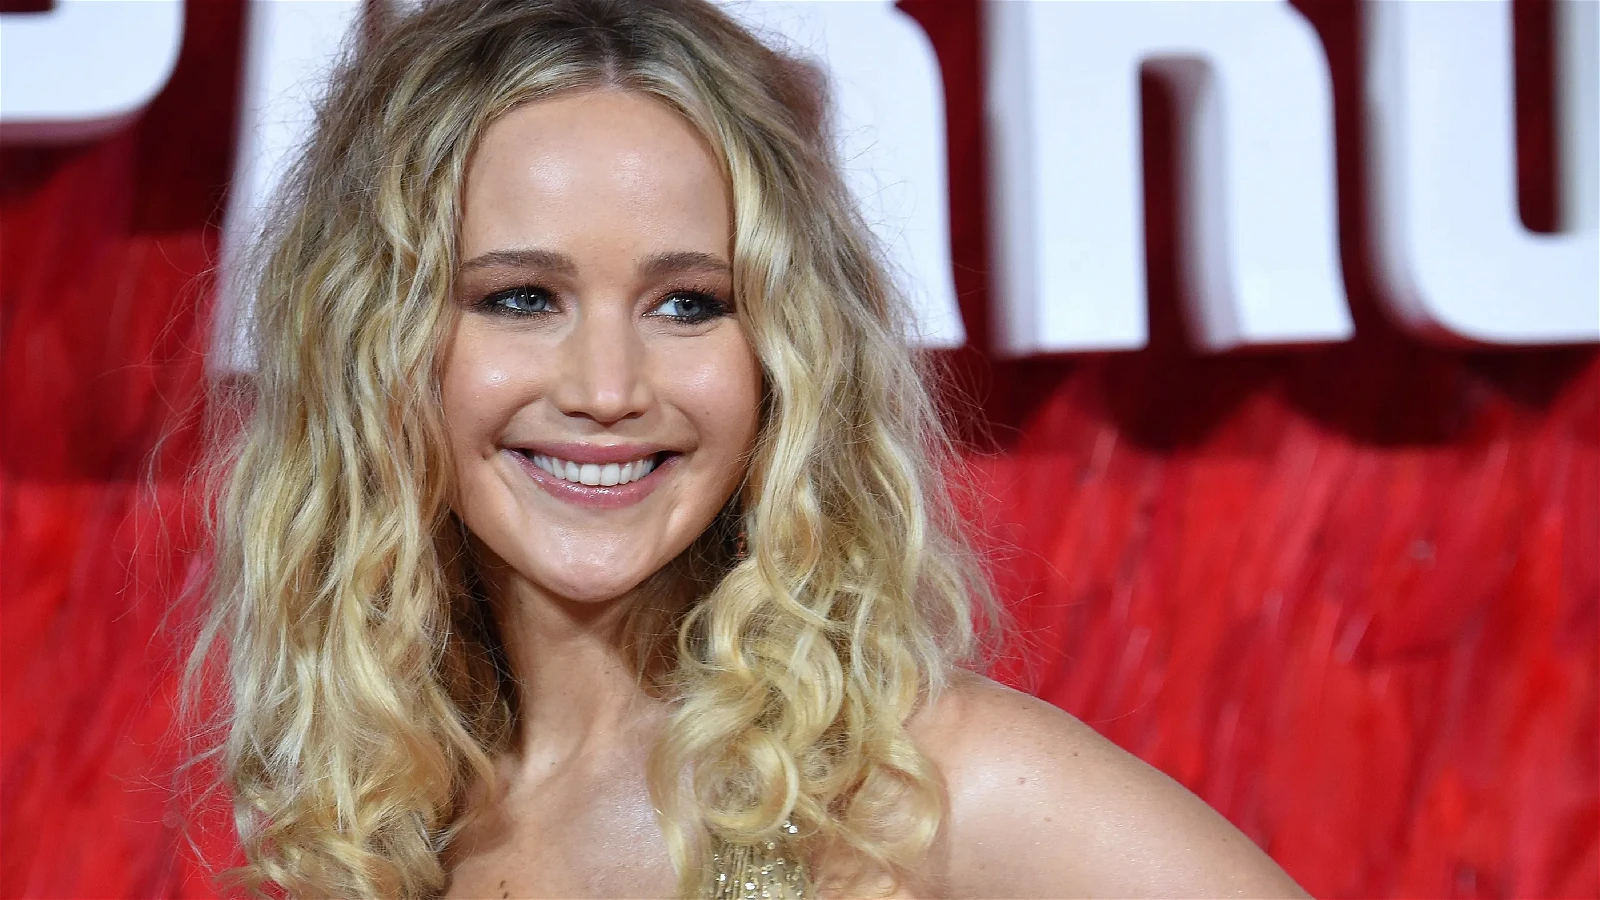 Jennifer Lawrence opens up about being told to lose weight by a female executive